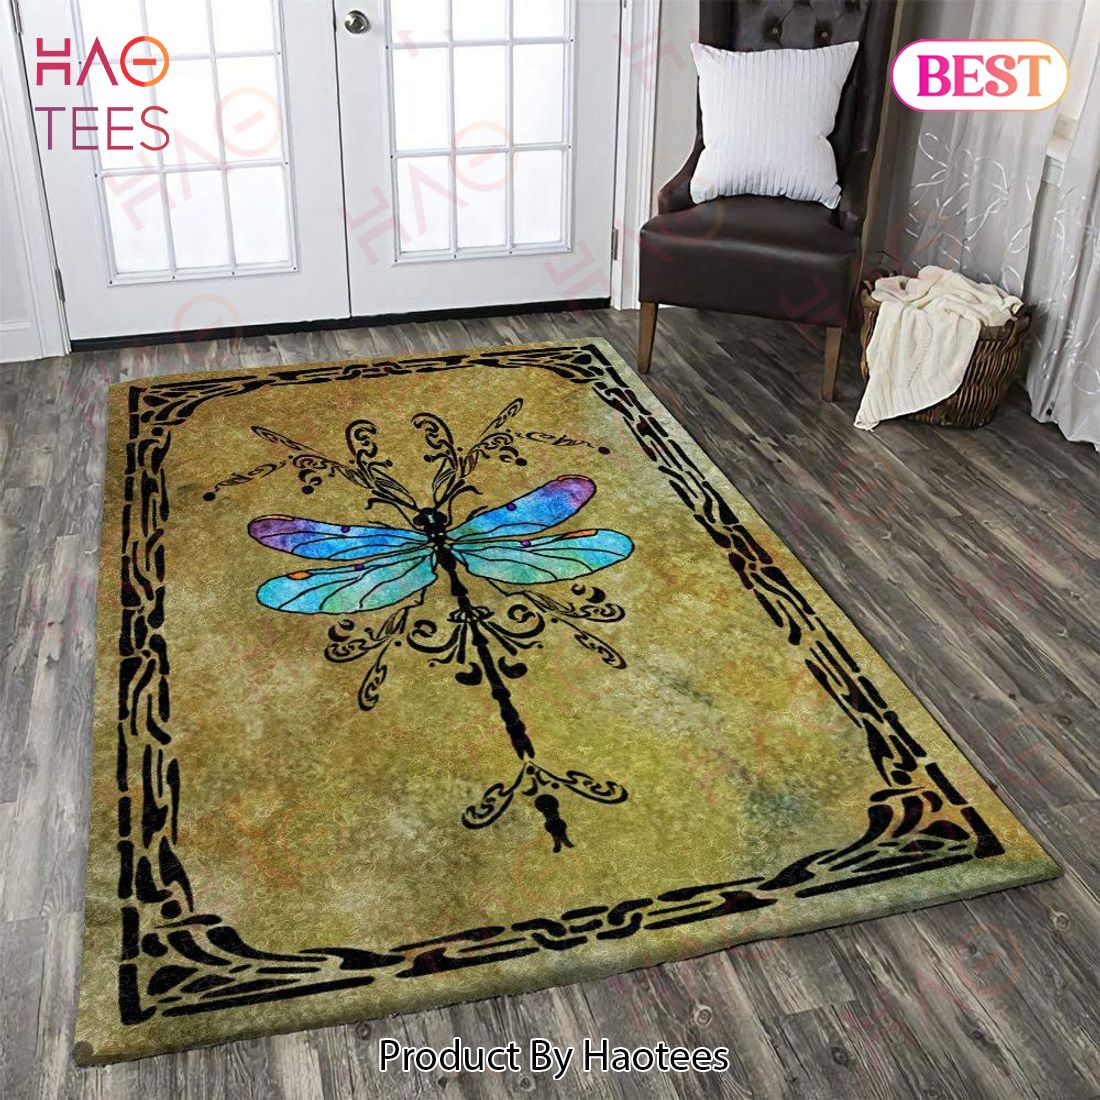 Dragonfly Limited Edition Area Rugs Carpet Mat Kitchen Rugs Floor Decor – 7A71